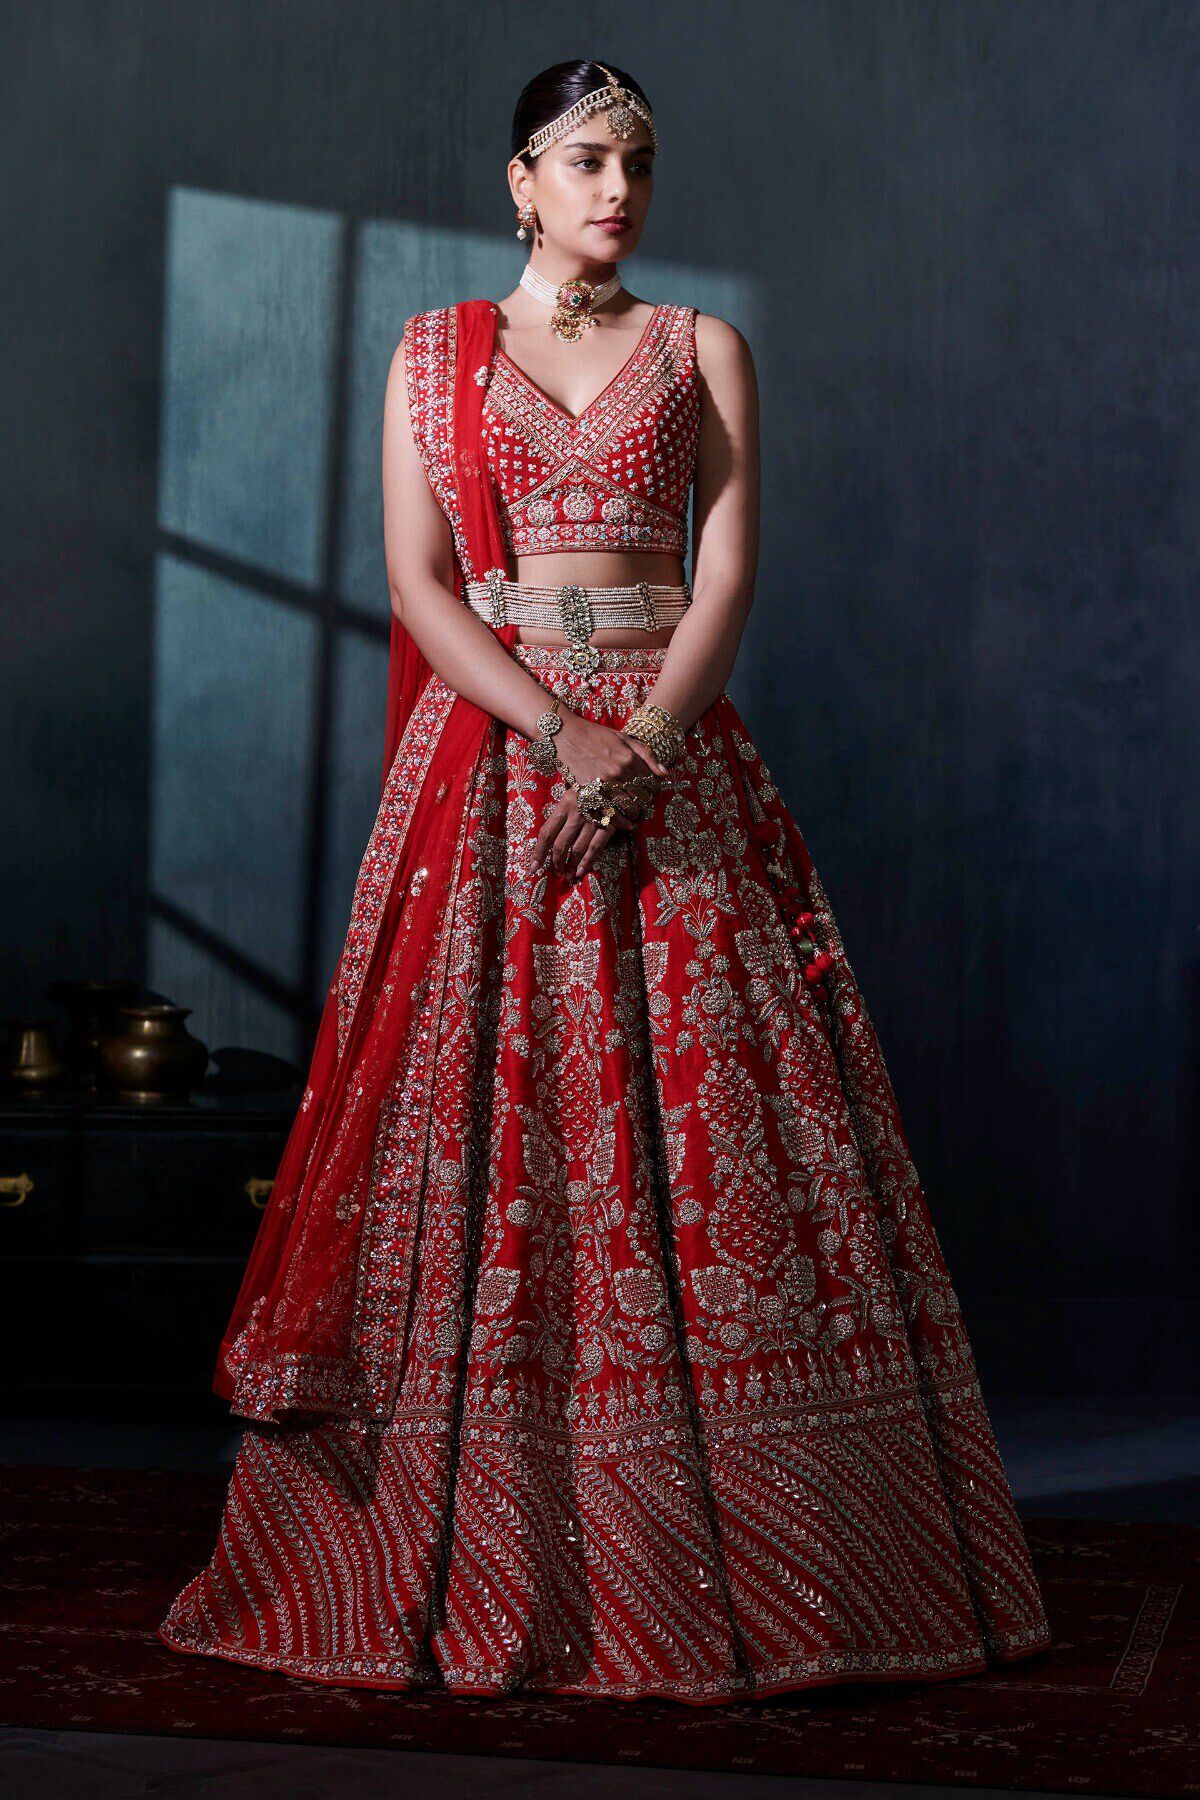 Ivory and Gold Brocade Lehenga Set available only at IBFW